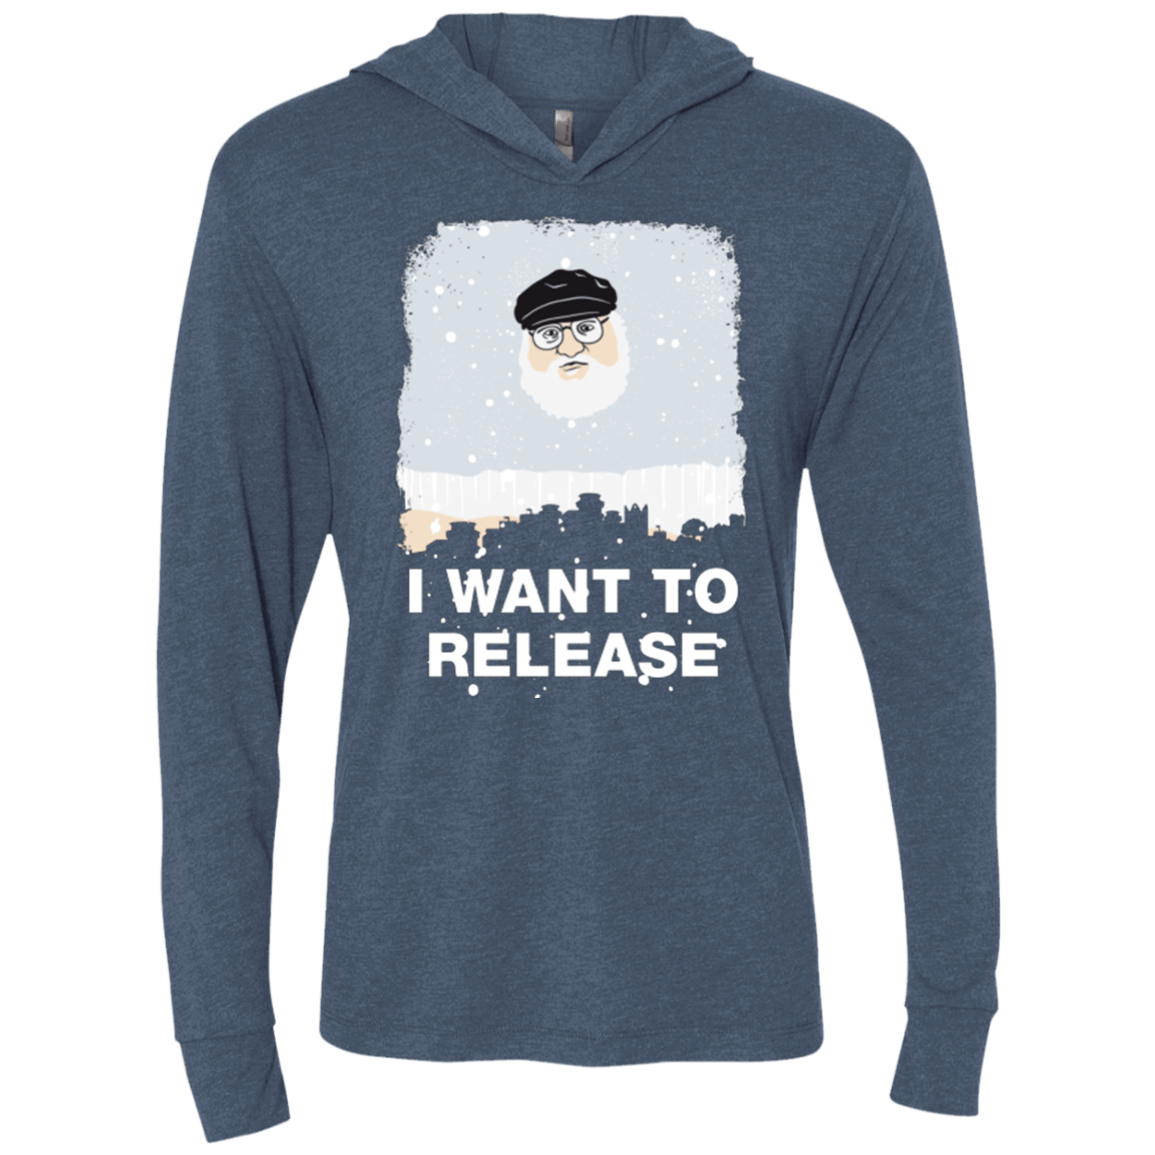 T-Shirts Indigo / X-Small I Want to Release Triblend Long Sleeve Hoodie Tee